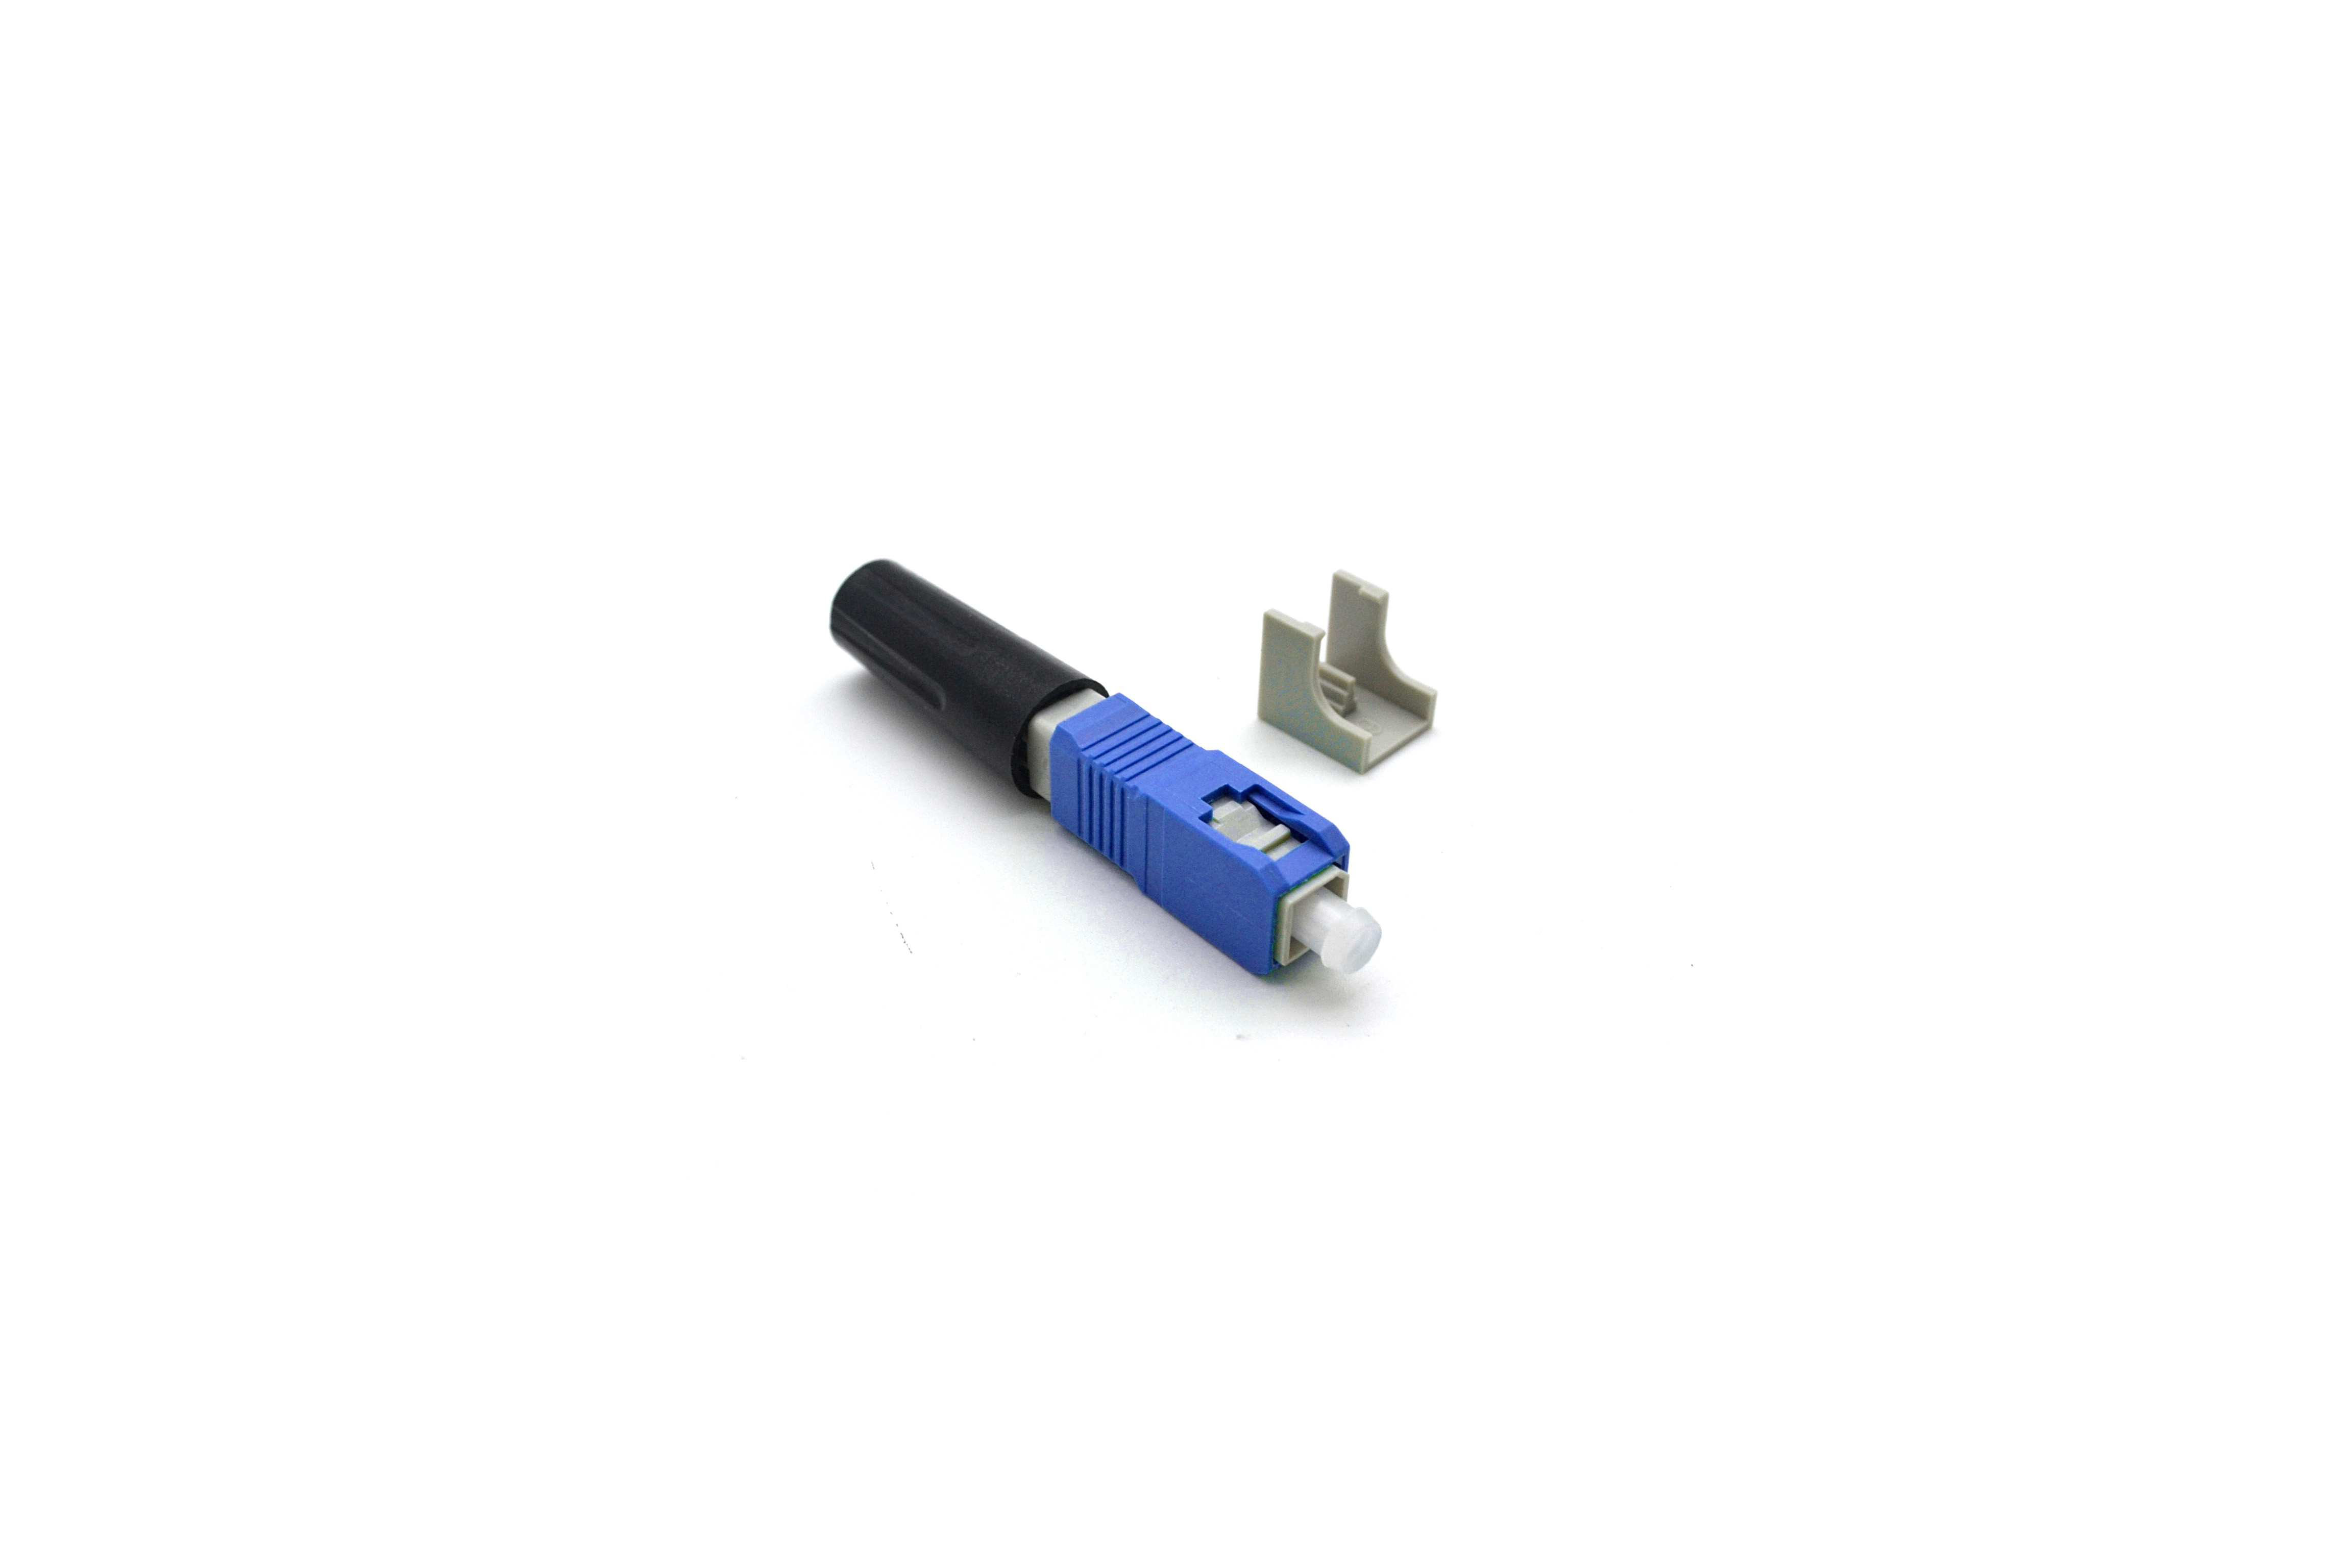 Carefiber dependable lc fast connector trader for consumer elctronics-1